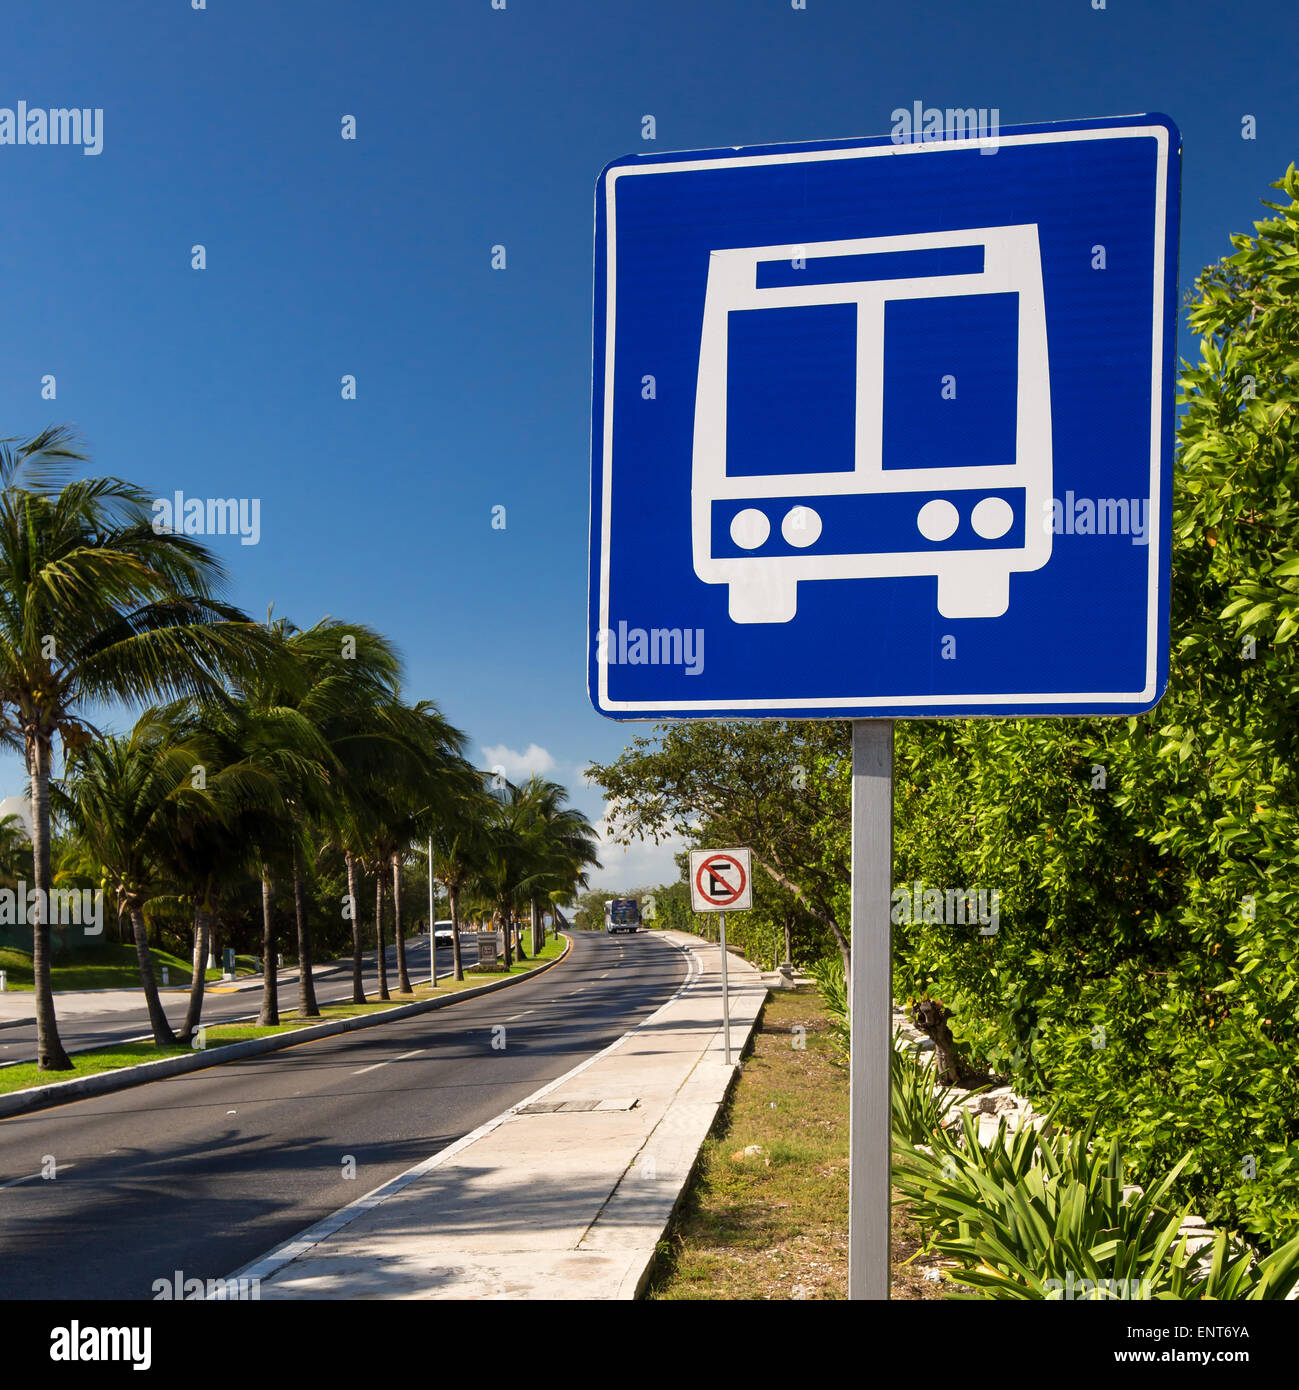 American road public bus stop sign on caribbean street road Stock Photo